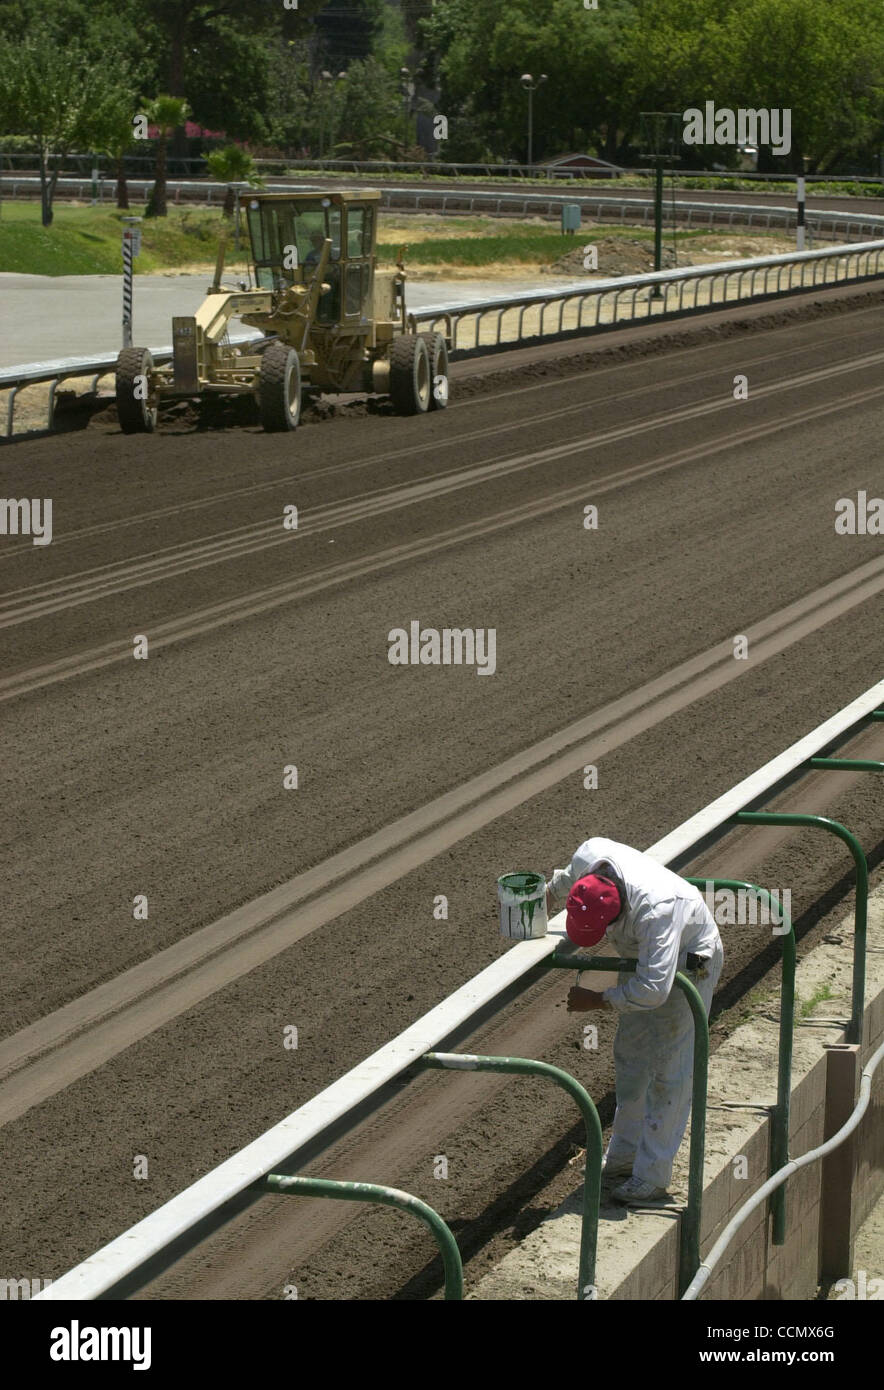 Forest green 'the same color as money' says painter Noel Rodriguez of Modesto who touches up the railing at the horse race track at the Alameda County Fair, Tuesday, June 29, 2004, in Pleasanton, Calif where the track is being groomed in preparation of horse racing Wednesday. (Contra Costa Times/Sus Stock Photo